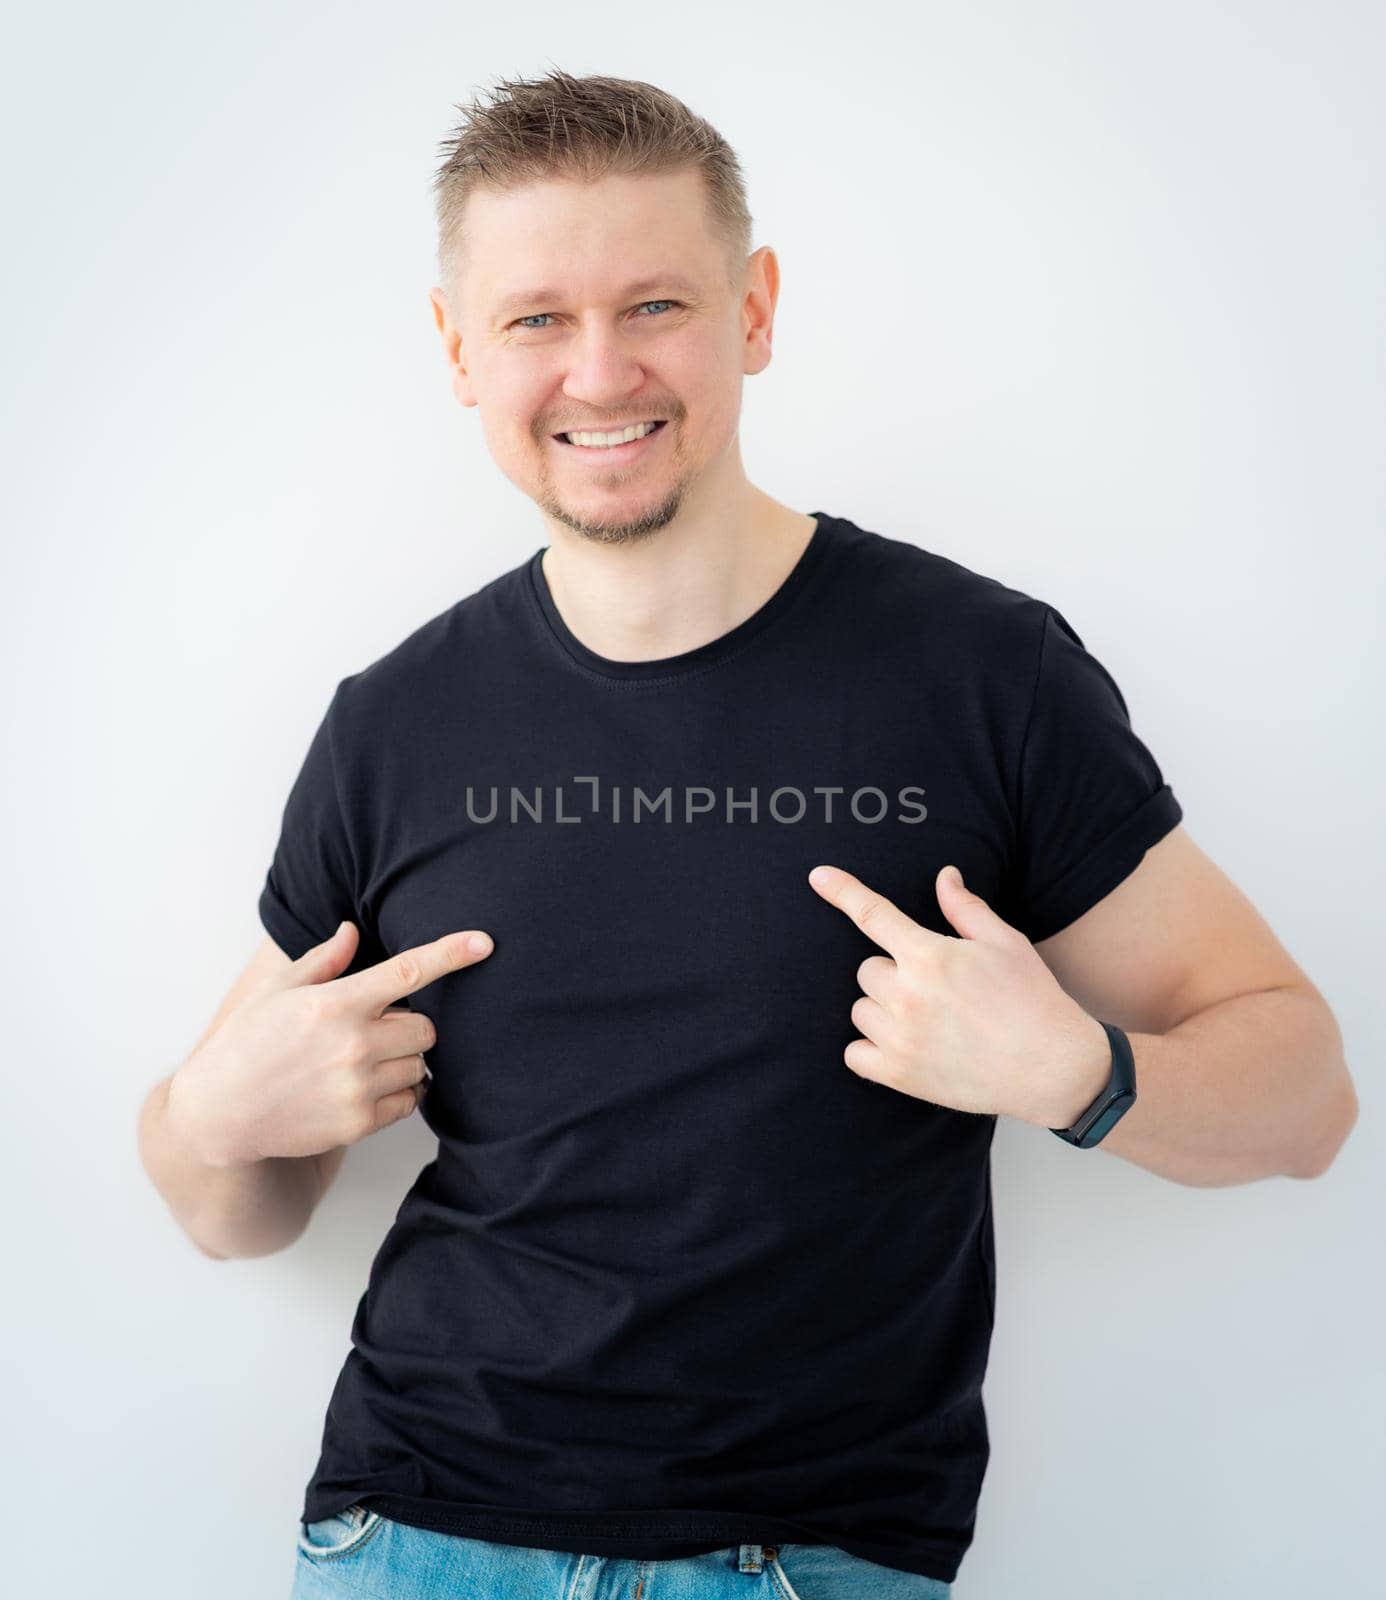 Attractive man pointing at t-shirt by GekaSkr